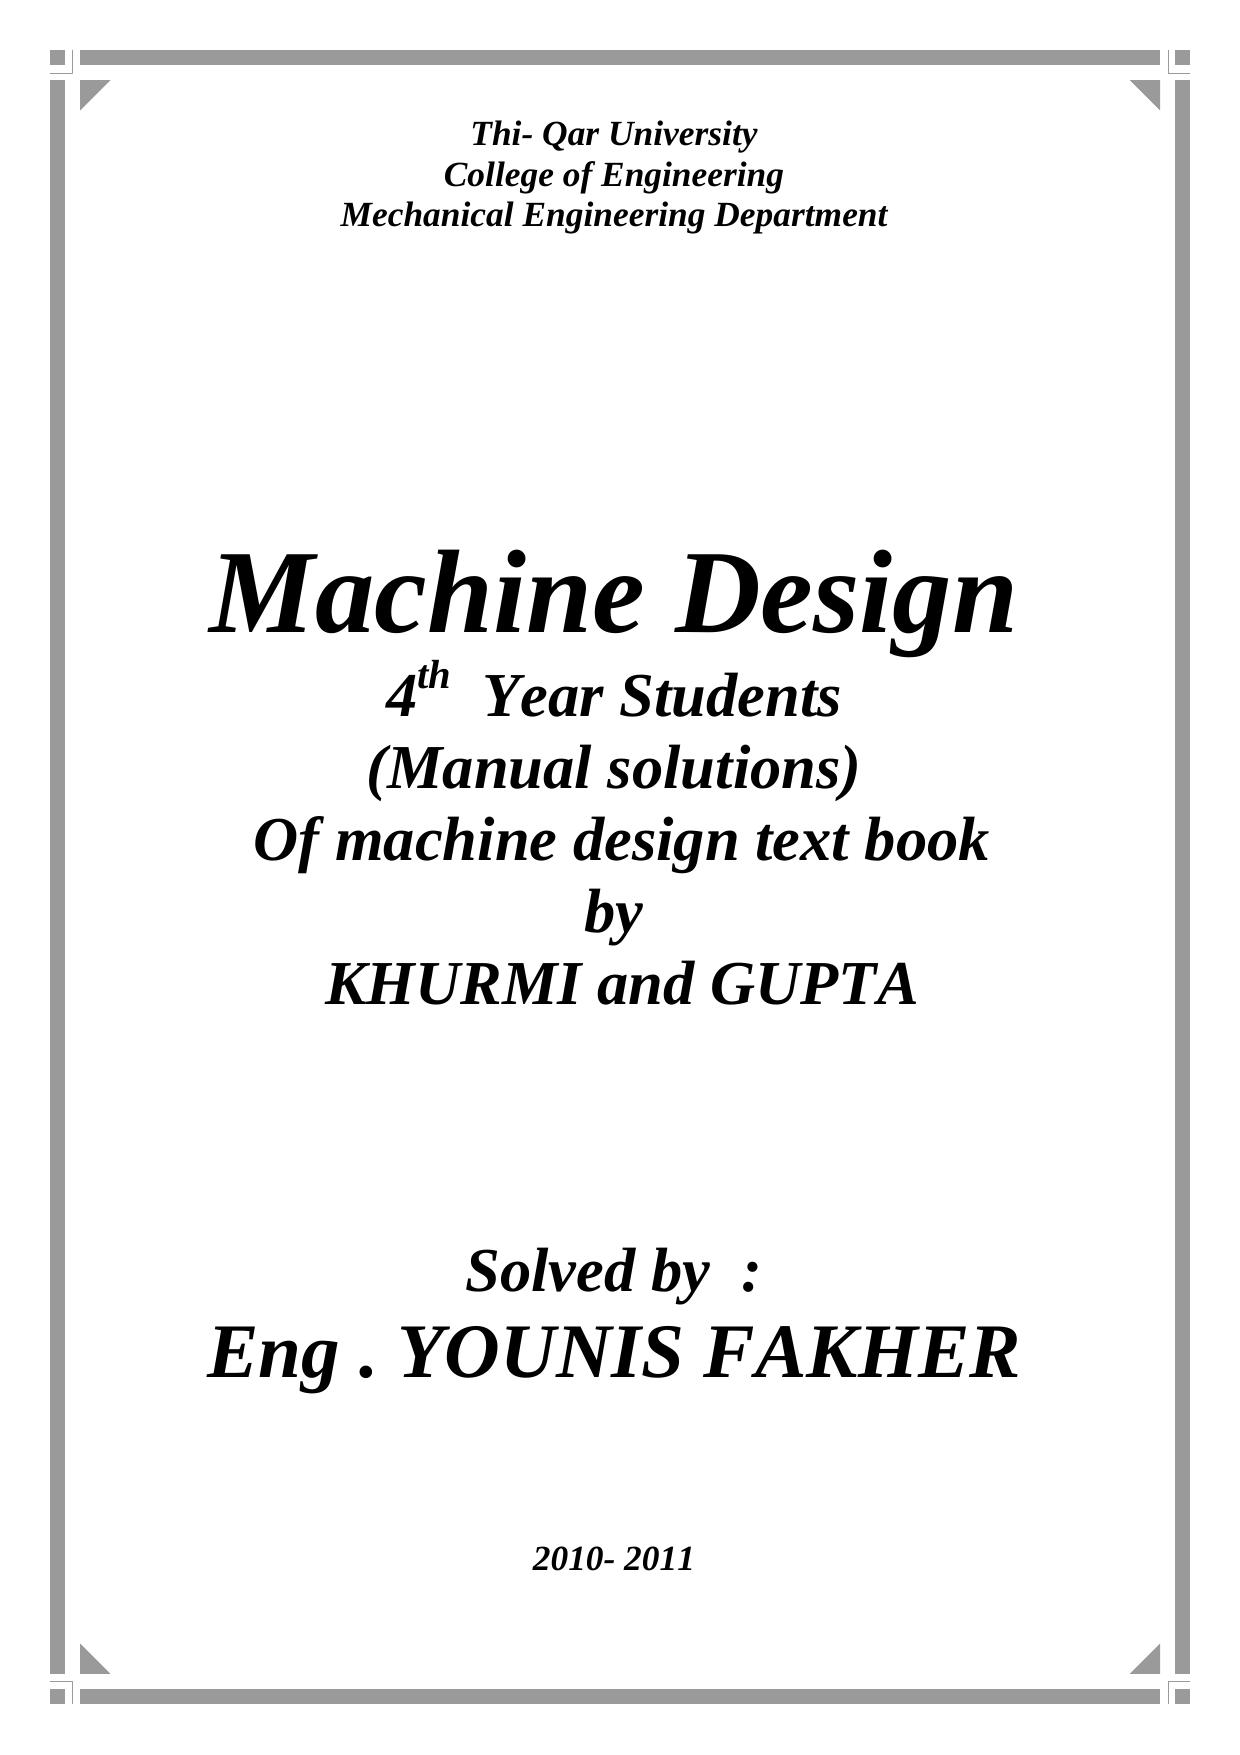 Machine design Manual solutions for By KHURMI and GUPTA